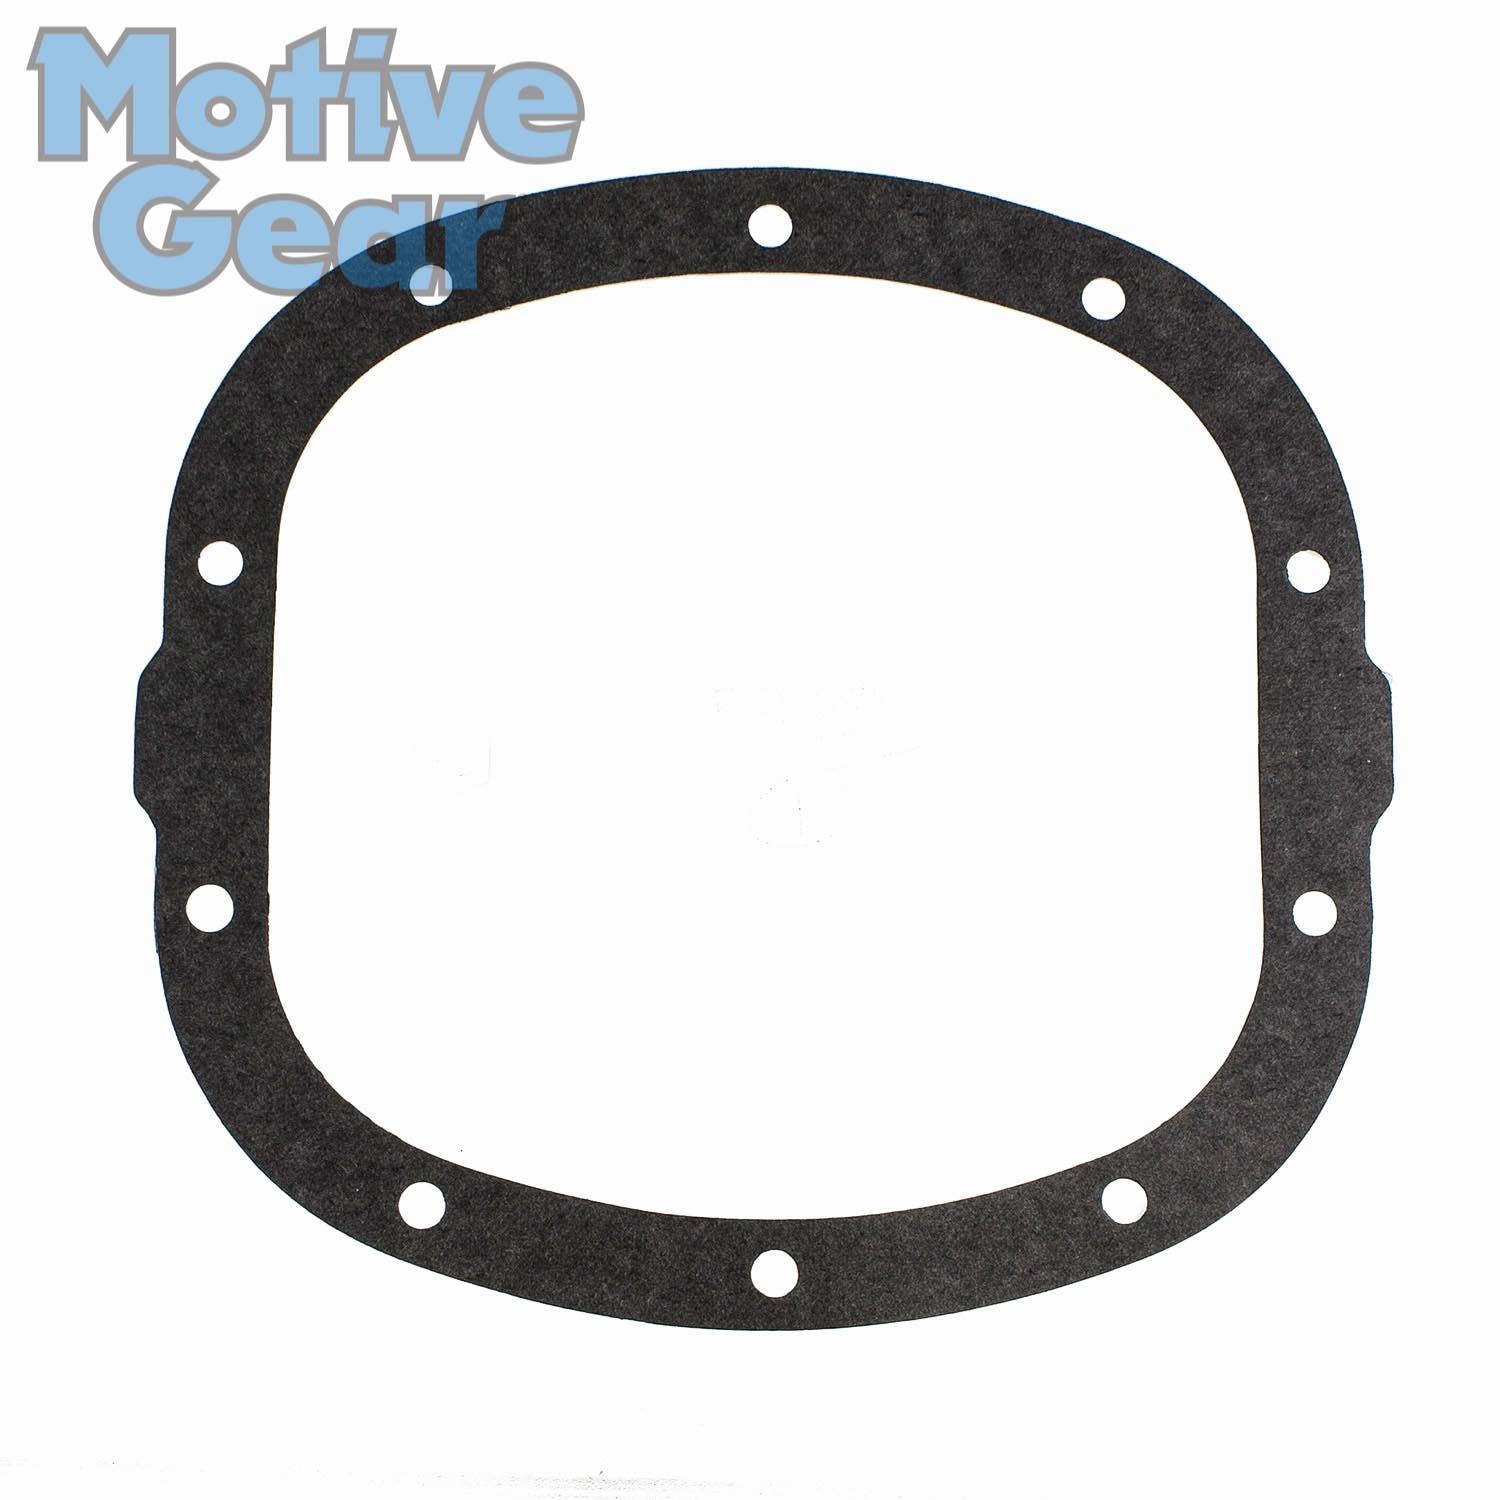 Motive Gear 5110 Differential Cover Gasket